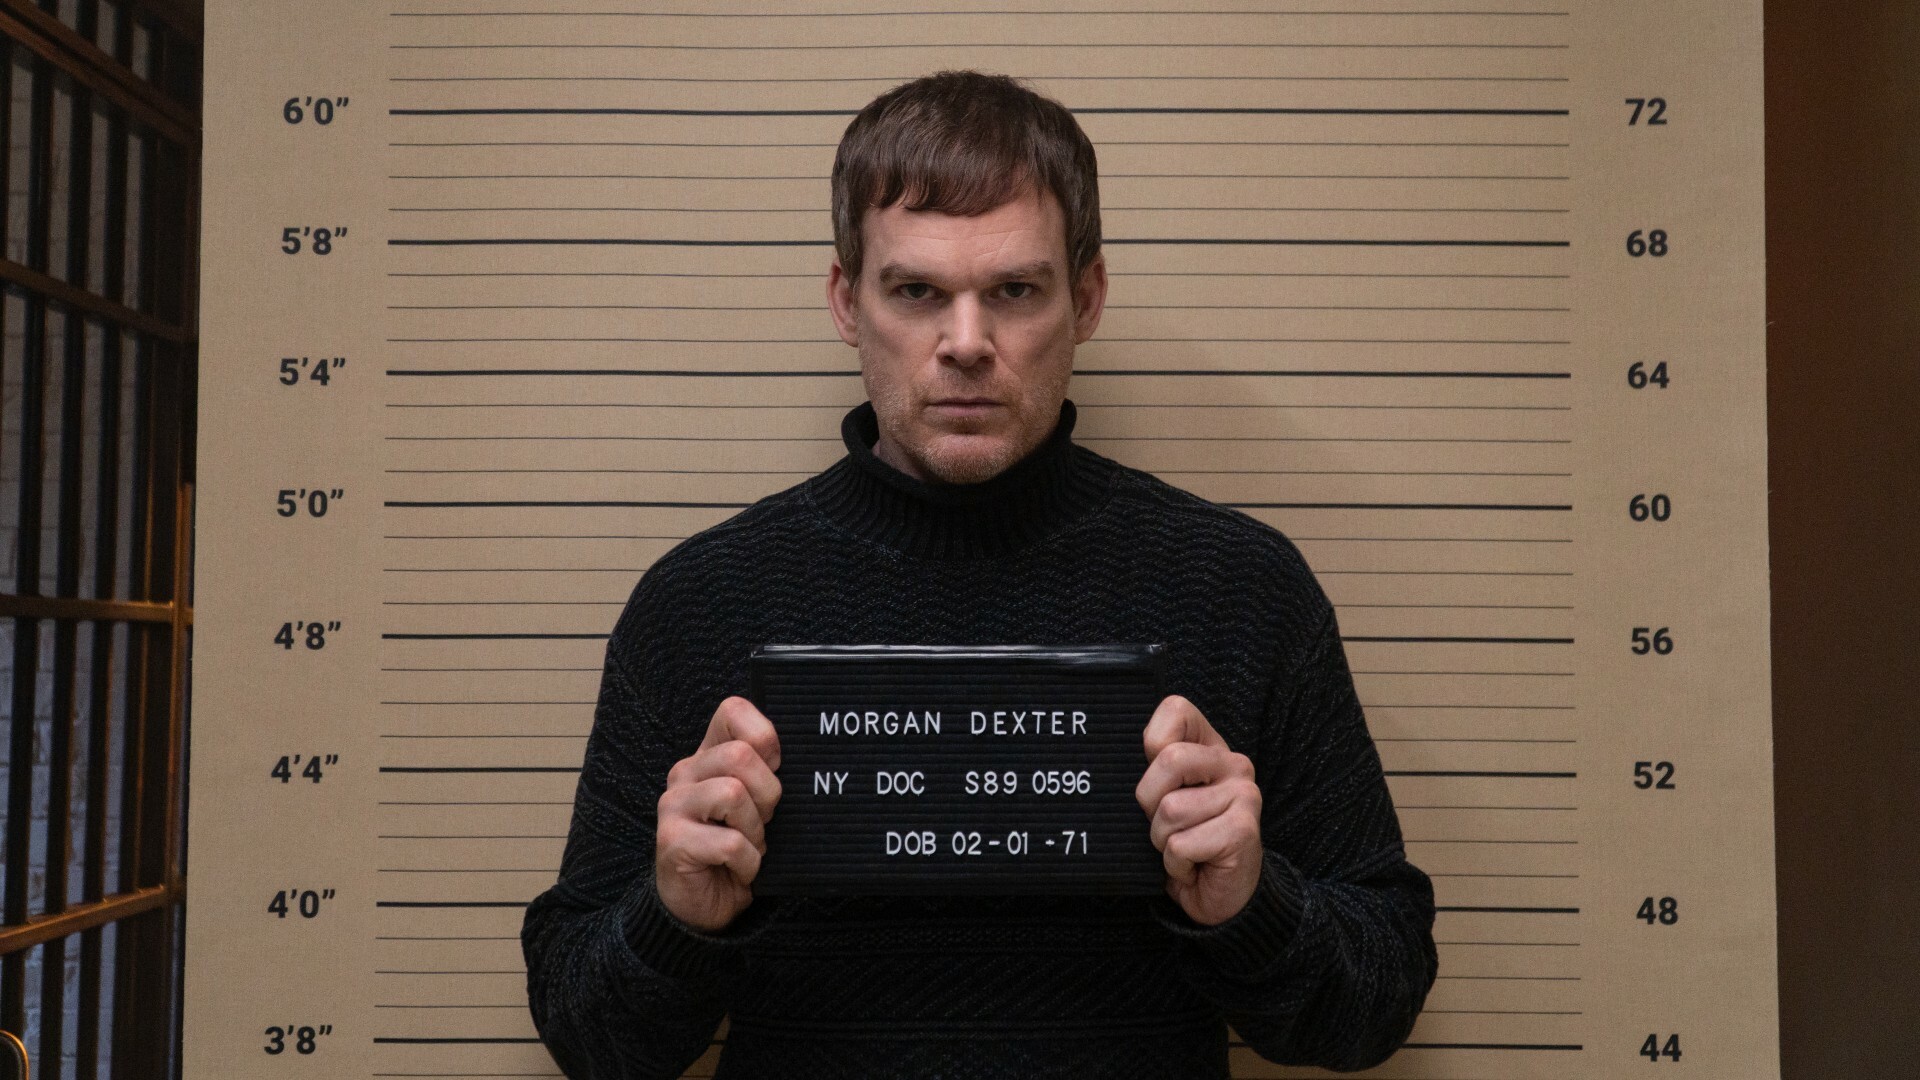 Dexter: New Blood: Serial killer, Portrayed by Michael C. Hall. 1920x1080 Full HD Background.